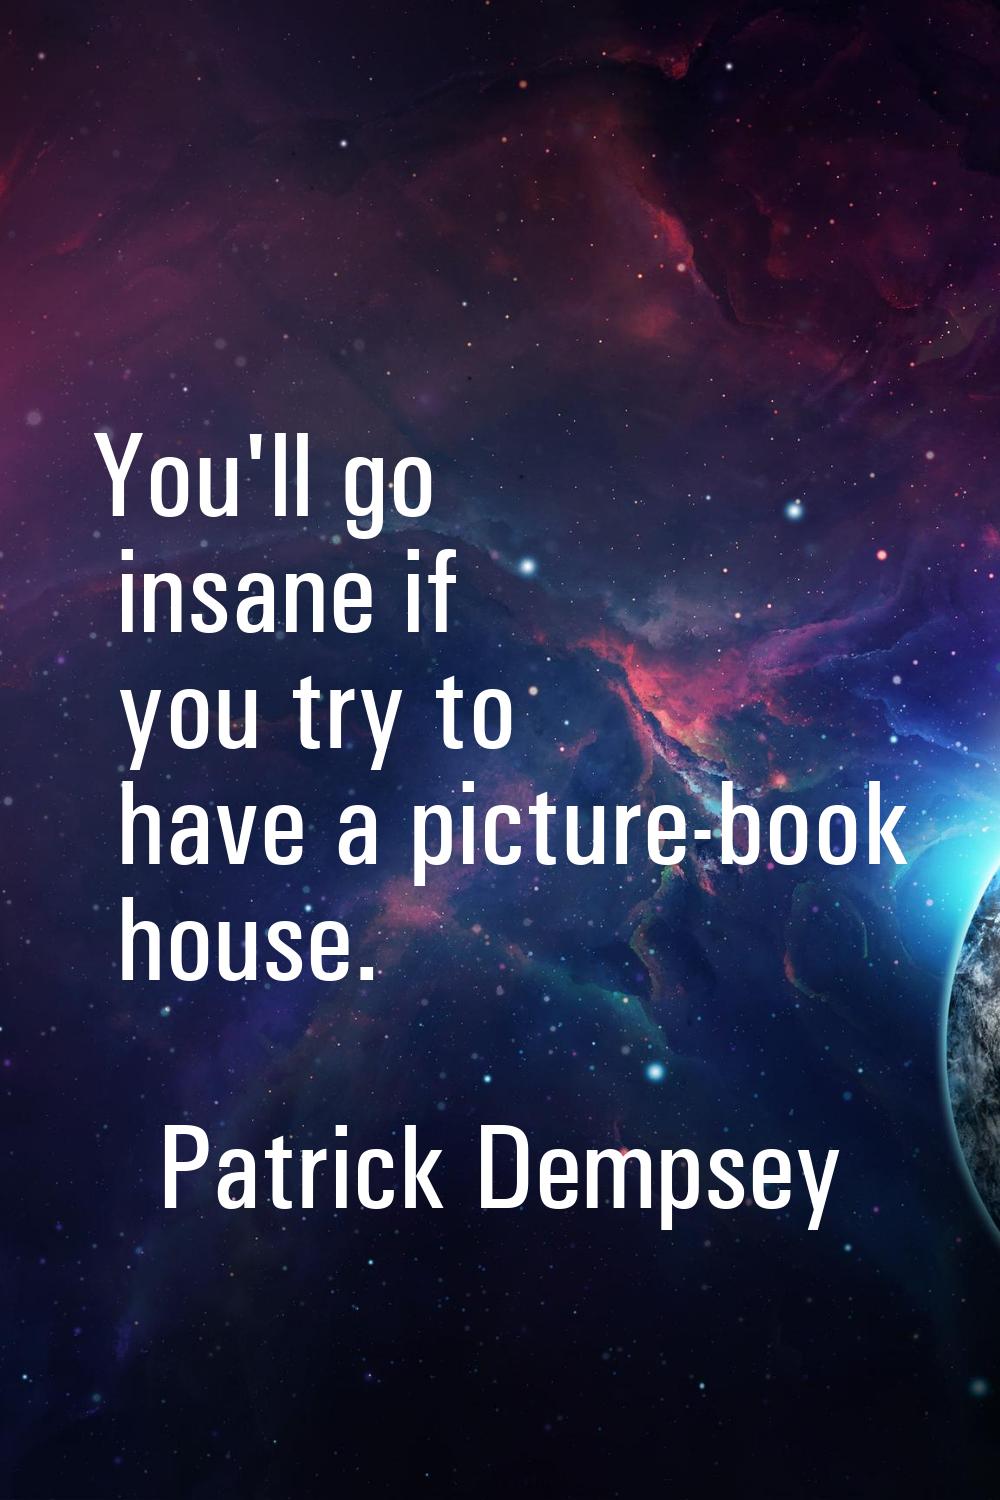 You'll go insane if you try to have a picture-book house.